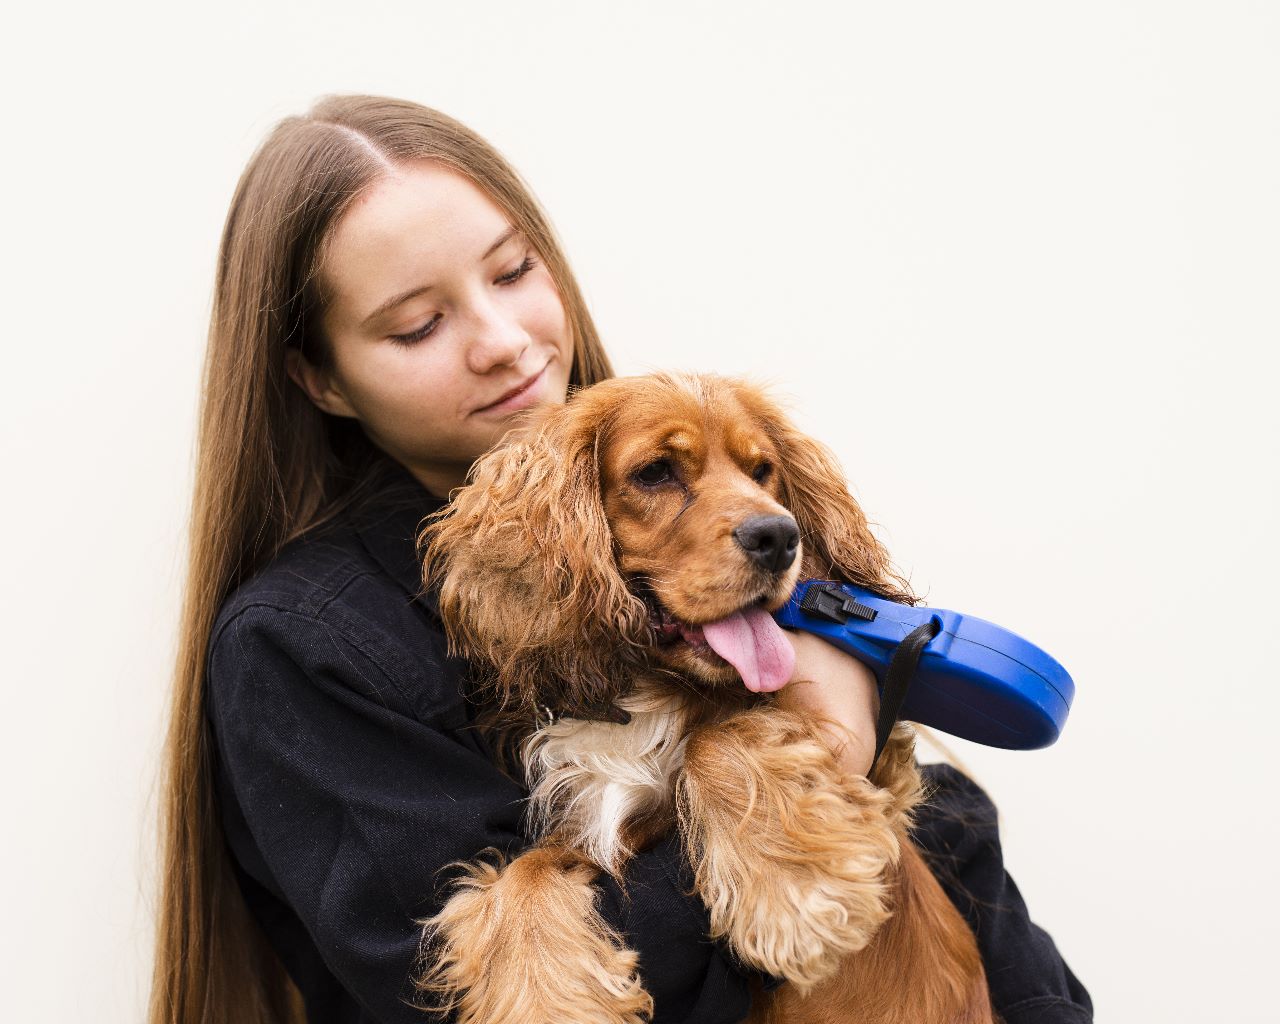 What medication is safe to give a dog with arthritis?